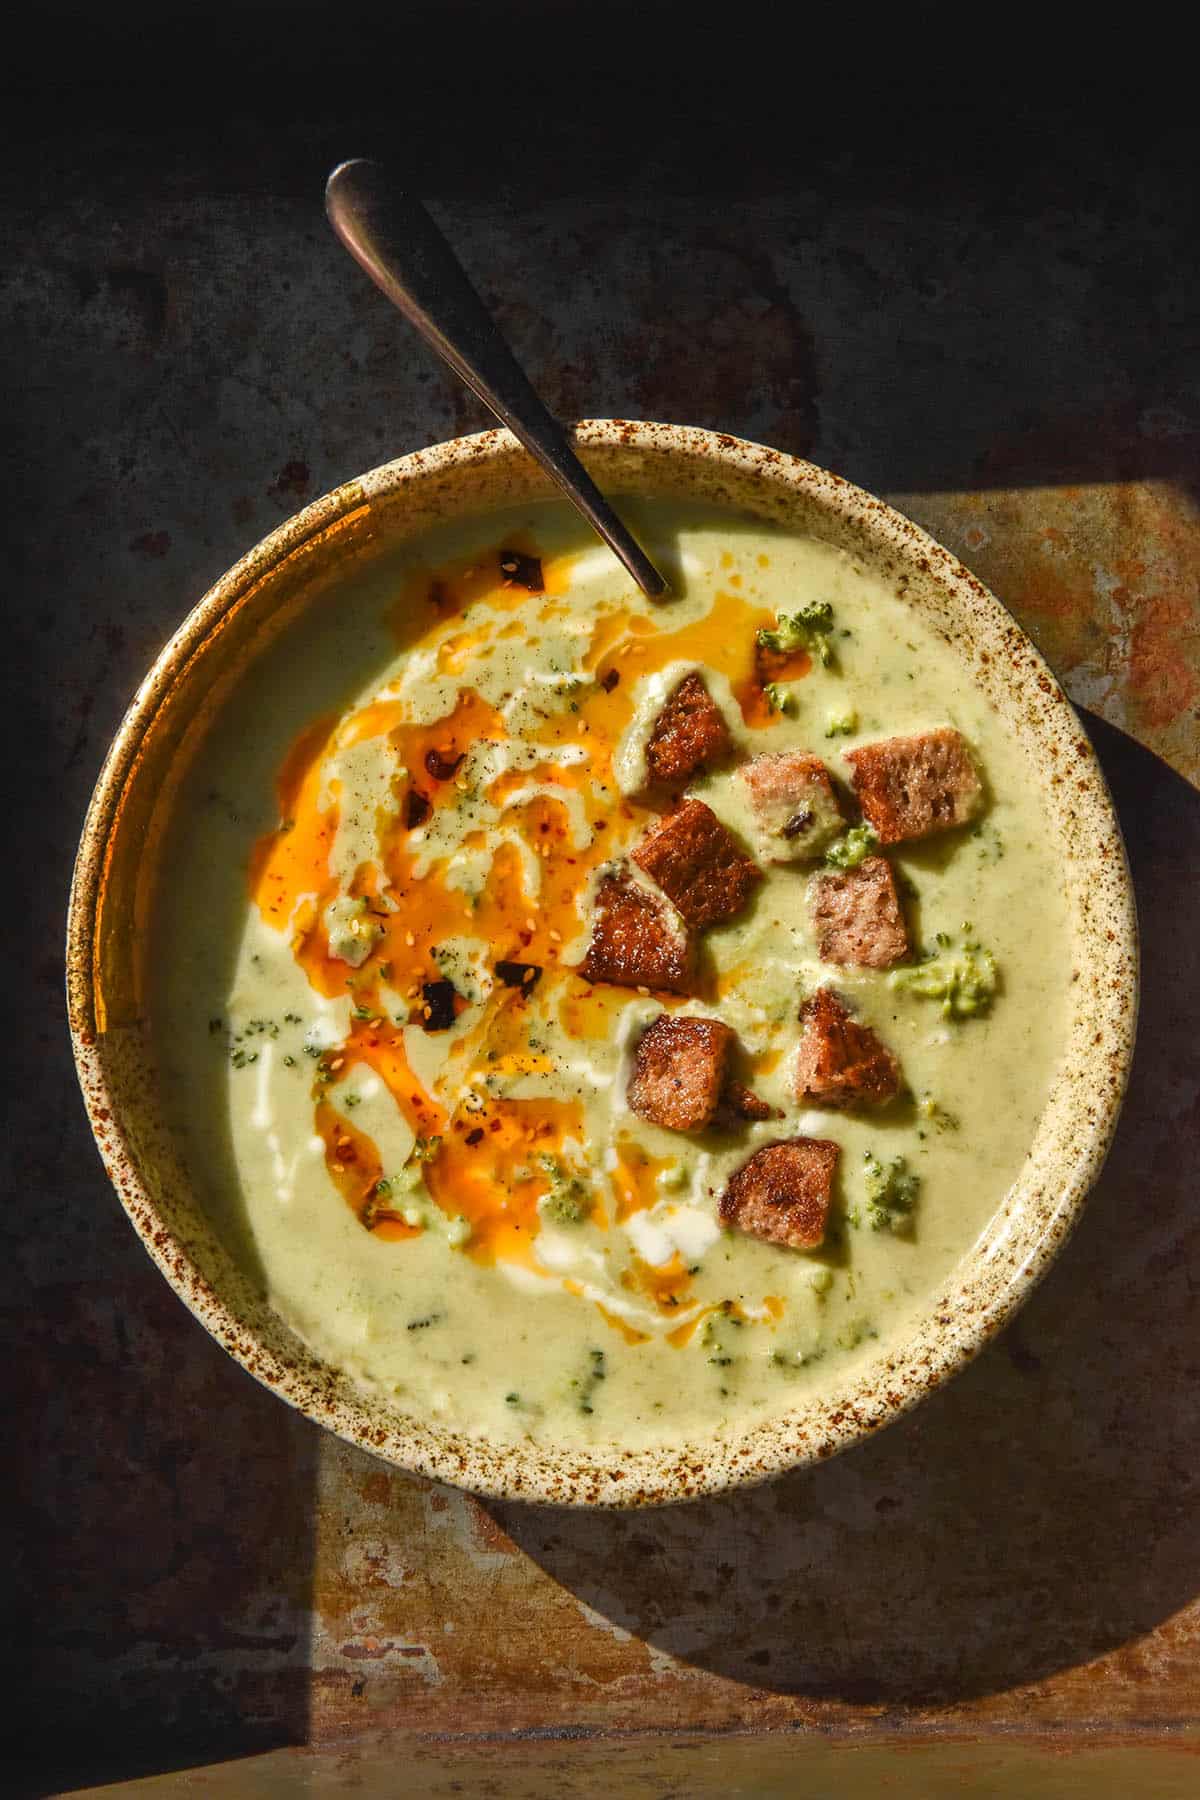 An aerial image of a beige speckled ceramic bowl filled with low FODMAP broccoli cheddar soup. The soup is topped with cream, low FODMAP chilli crisp and gluten free croutons and sits on a dark steel backdrop in contrasting sunlight.